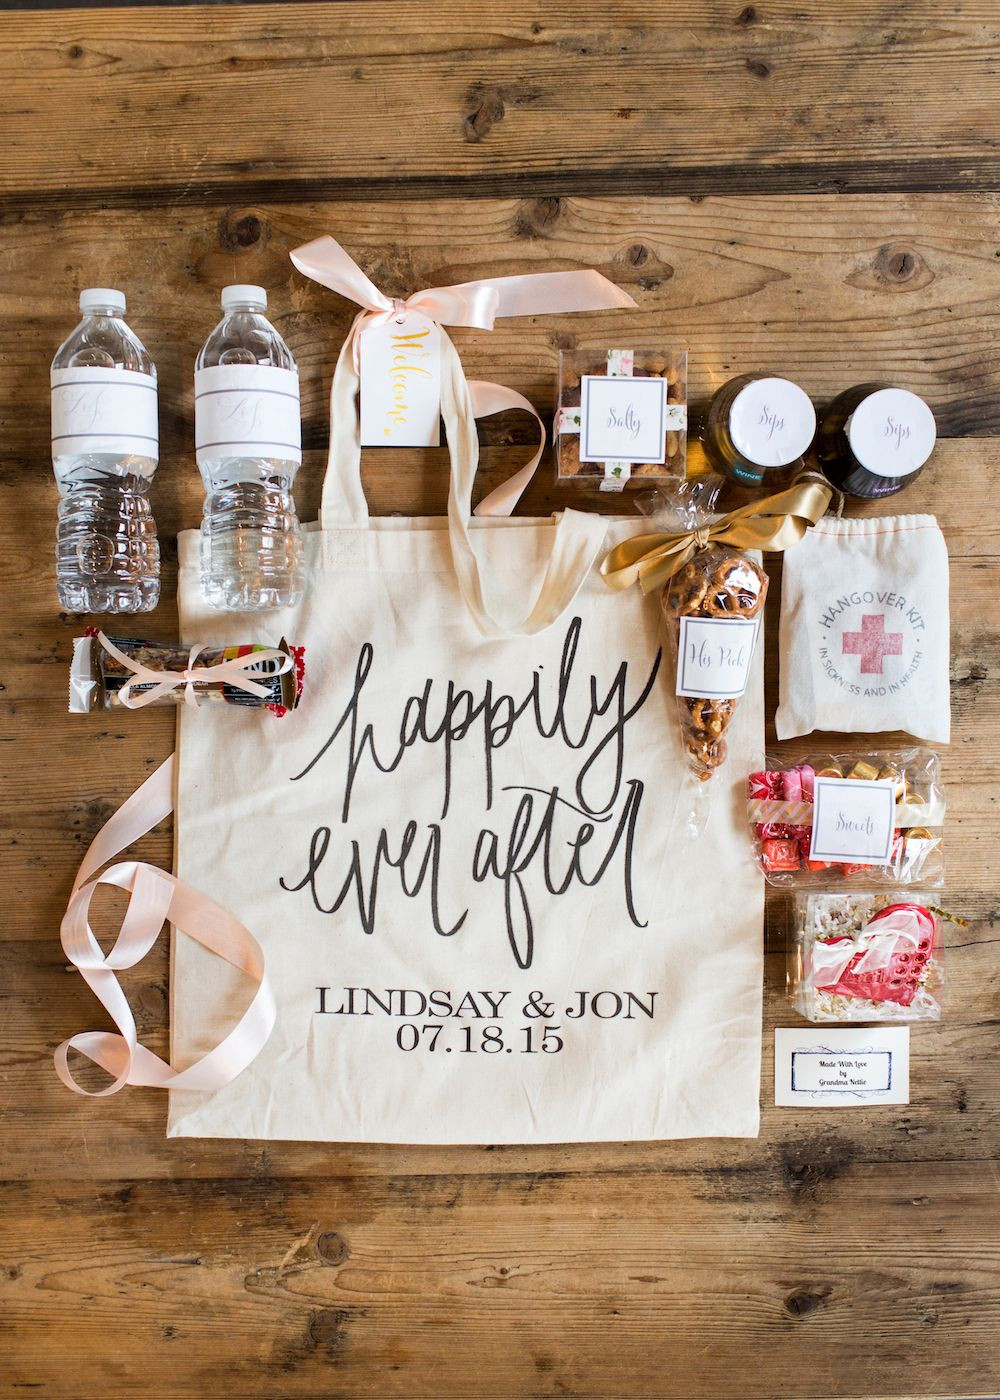 Destination Wedding Gift Bag Ideas
 Wedding Wednesday What We Put in Our Wedding Wel e Bags